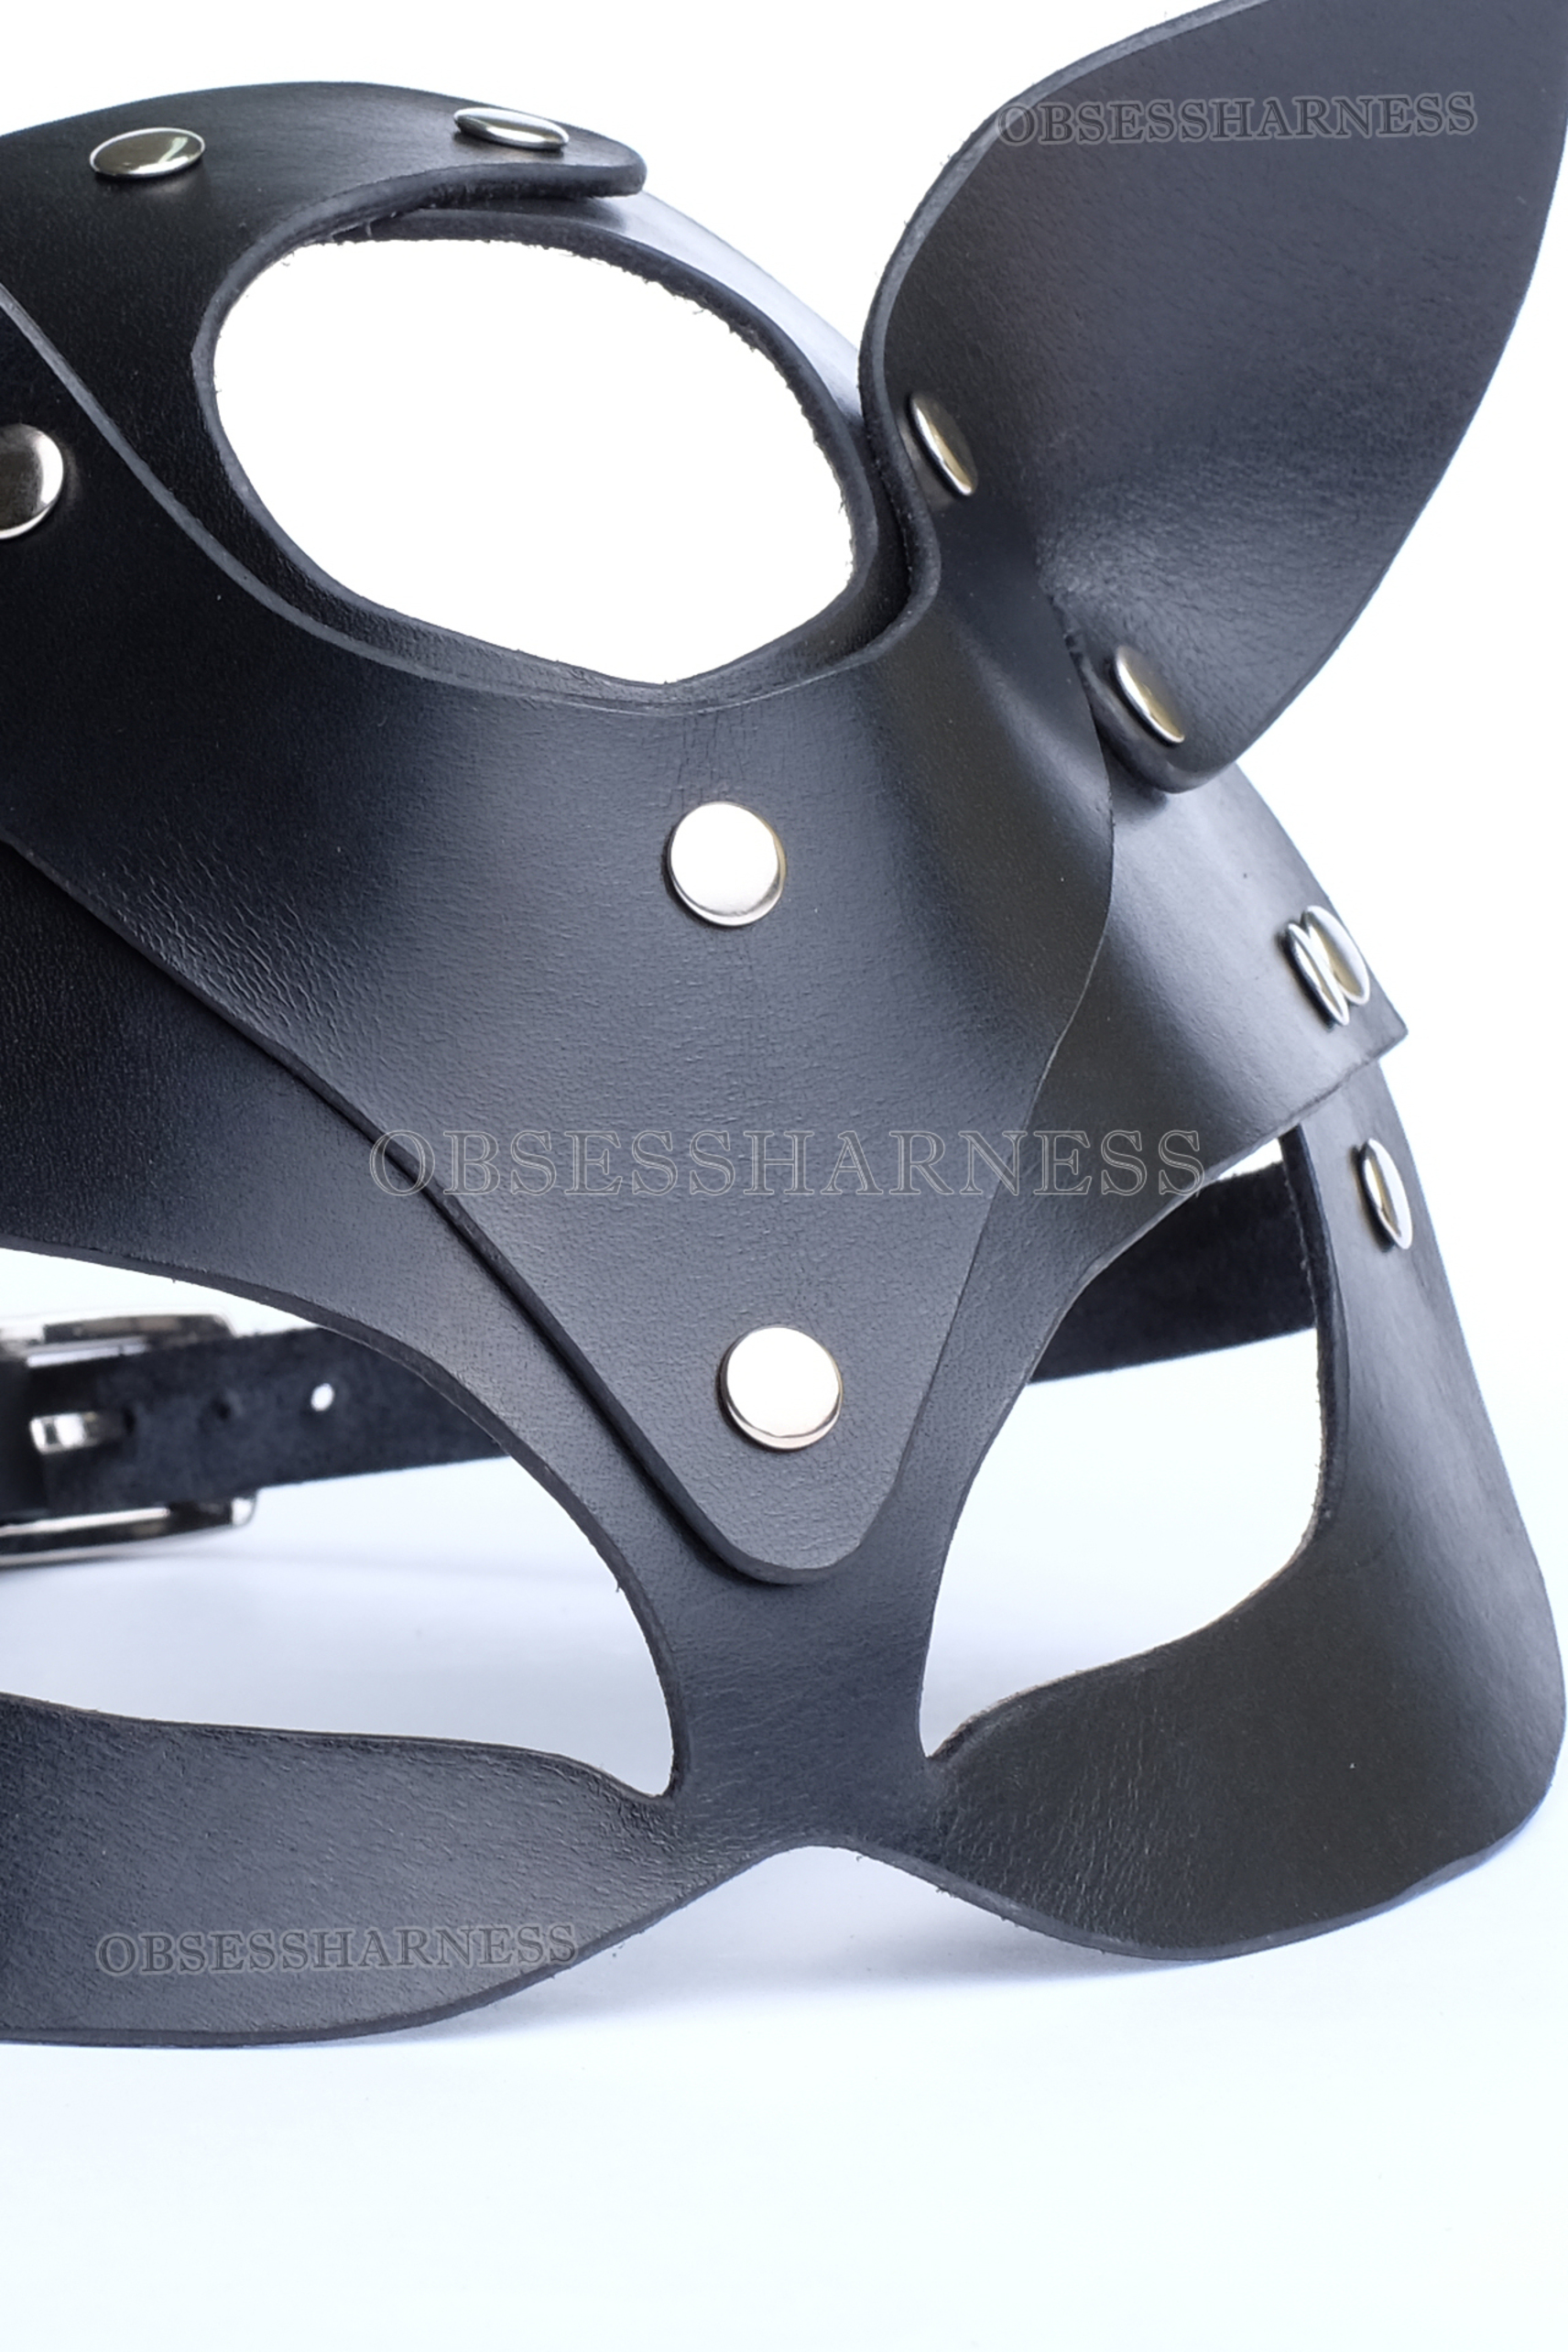  Leather fetish mask Cat black with slits for the eyes and adjustment at the back for pet games and BDSM